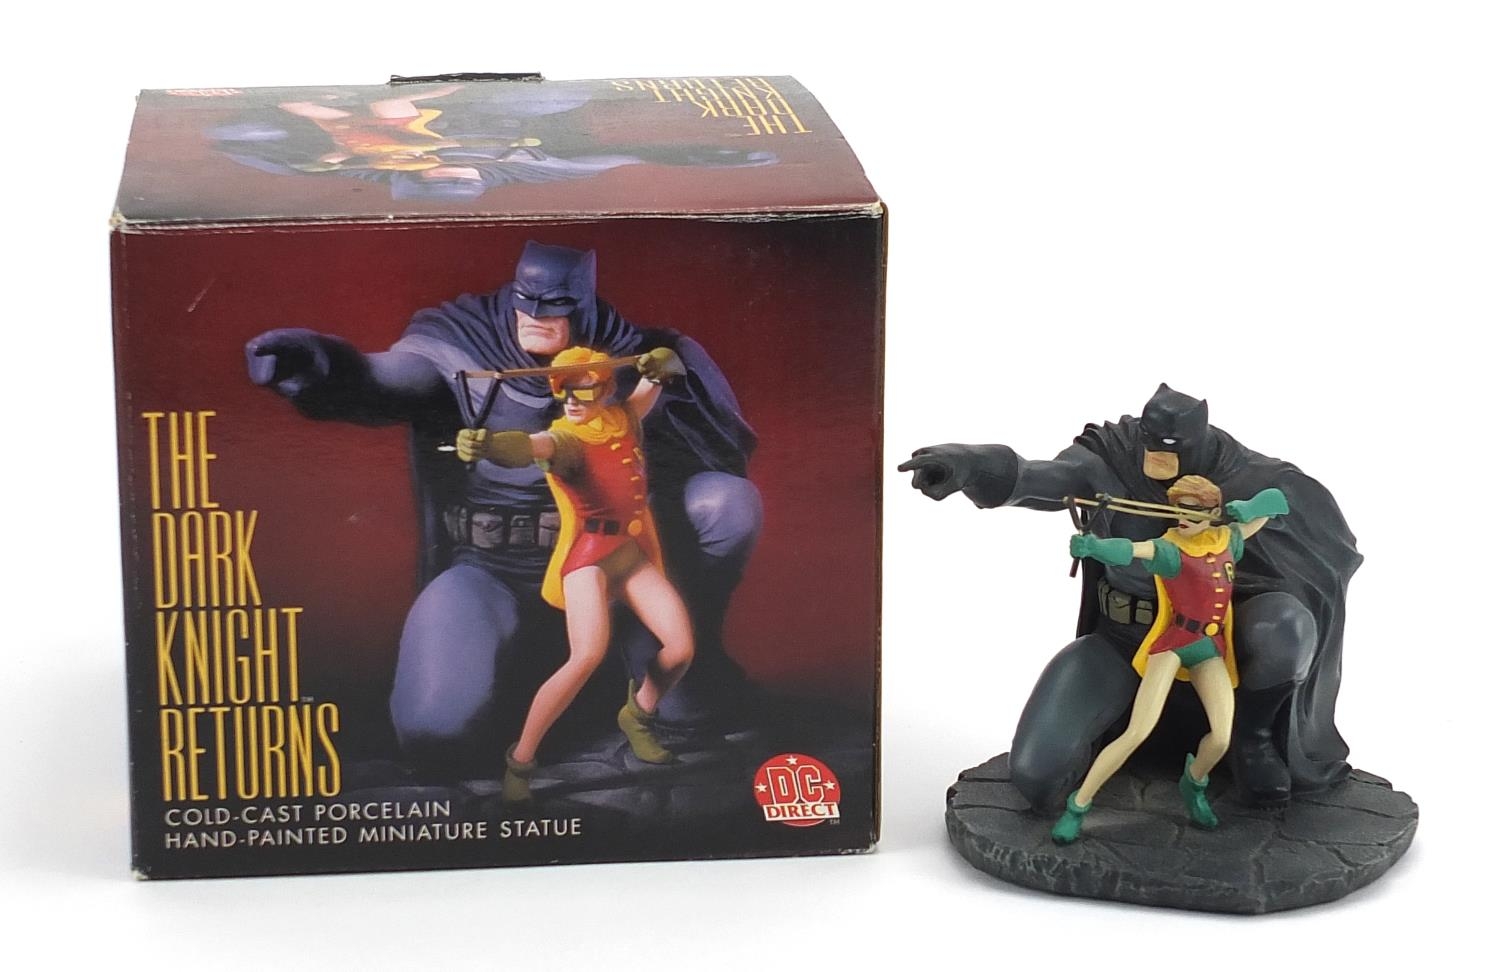 The Dark Knight Returns Batman and Robin collectable figure with box by D C Direct, limited